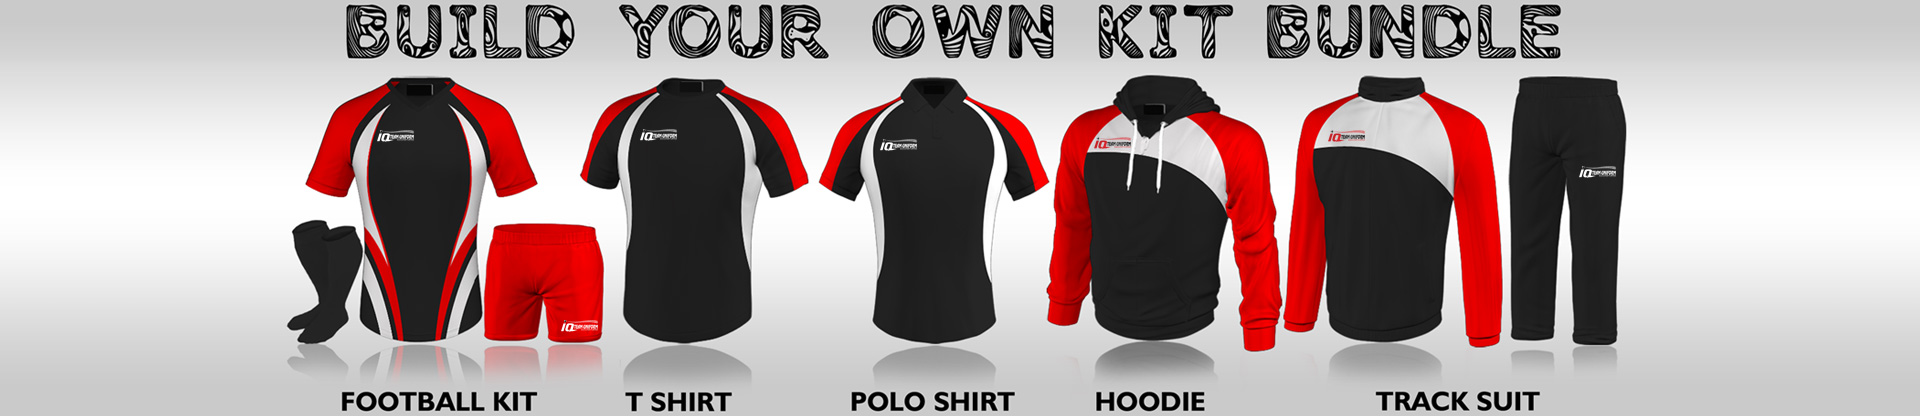 Customize your own kit bundle with iq team uniform manufacturing, Football kit, T-shirt, Polo Shirt, hoodies, Tracksuits